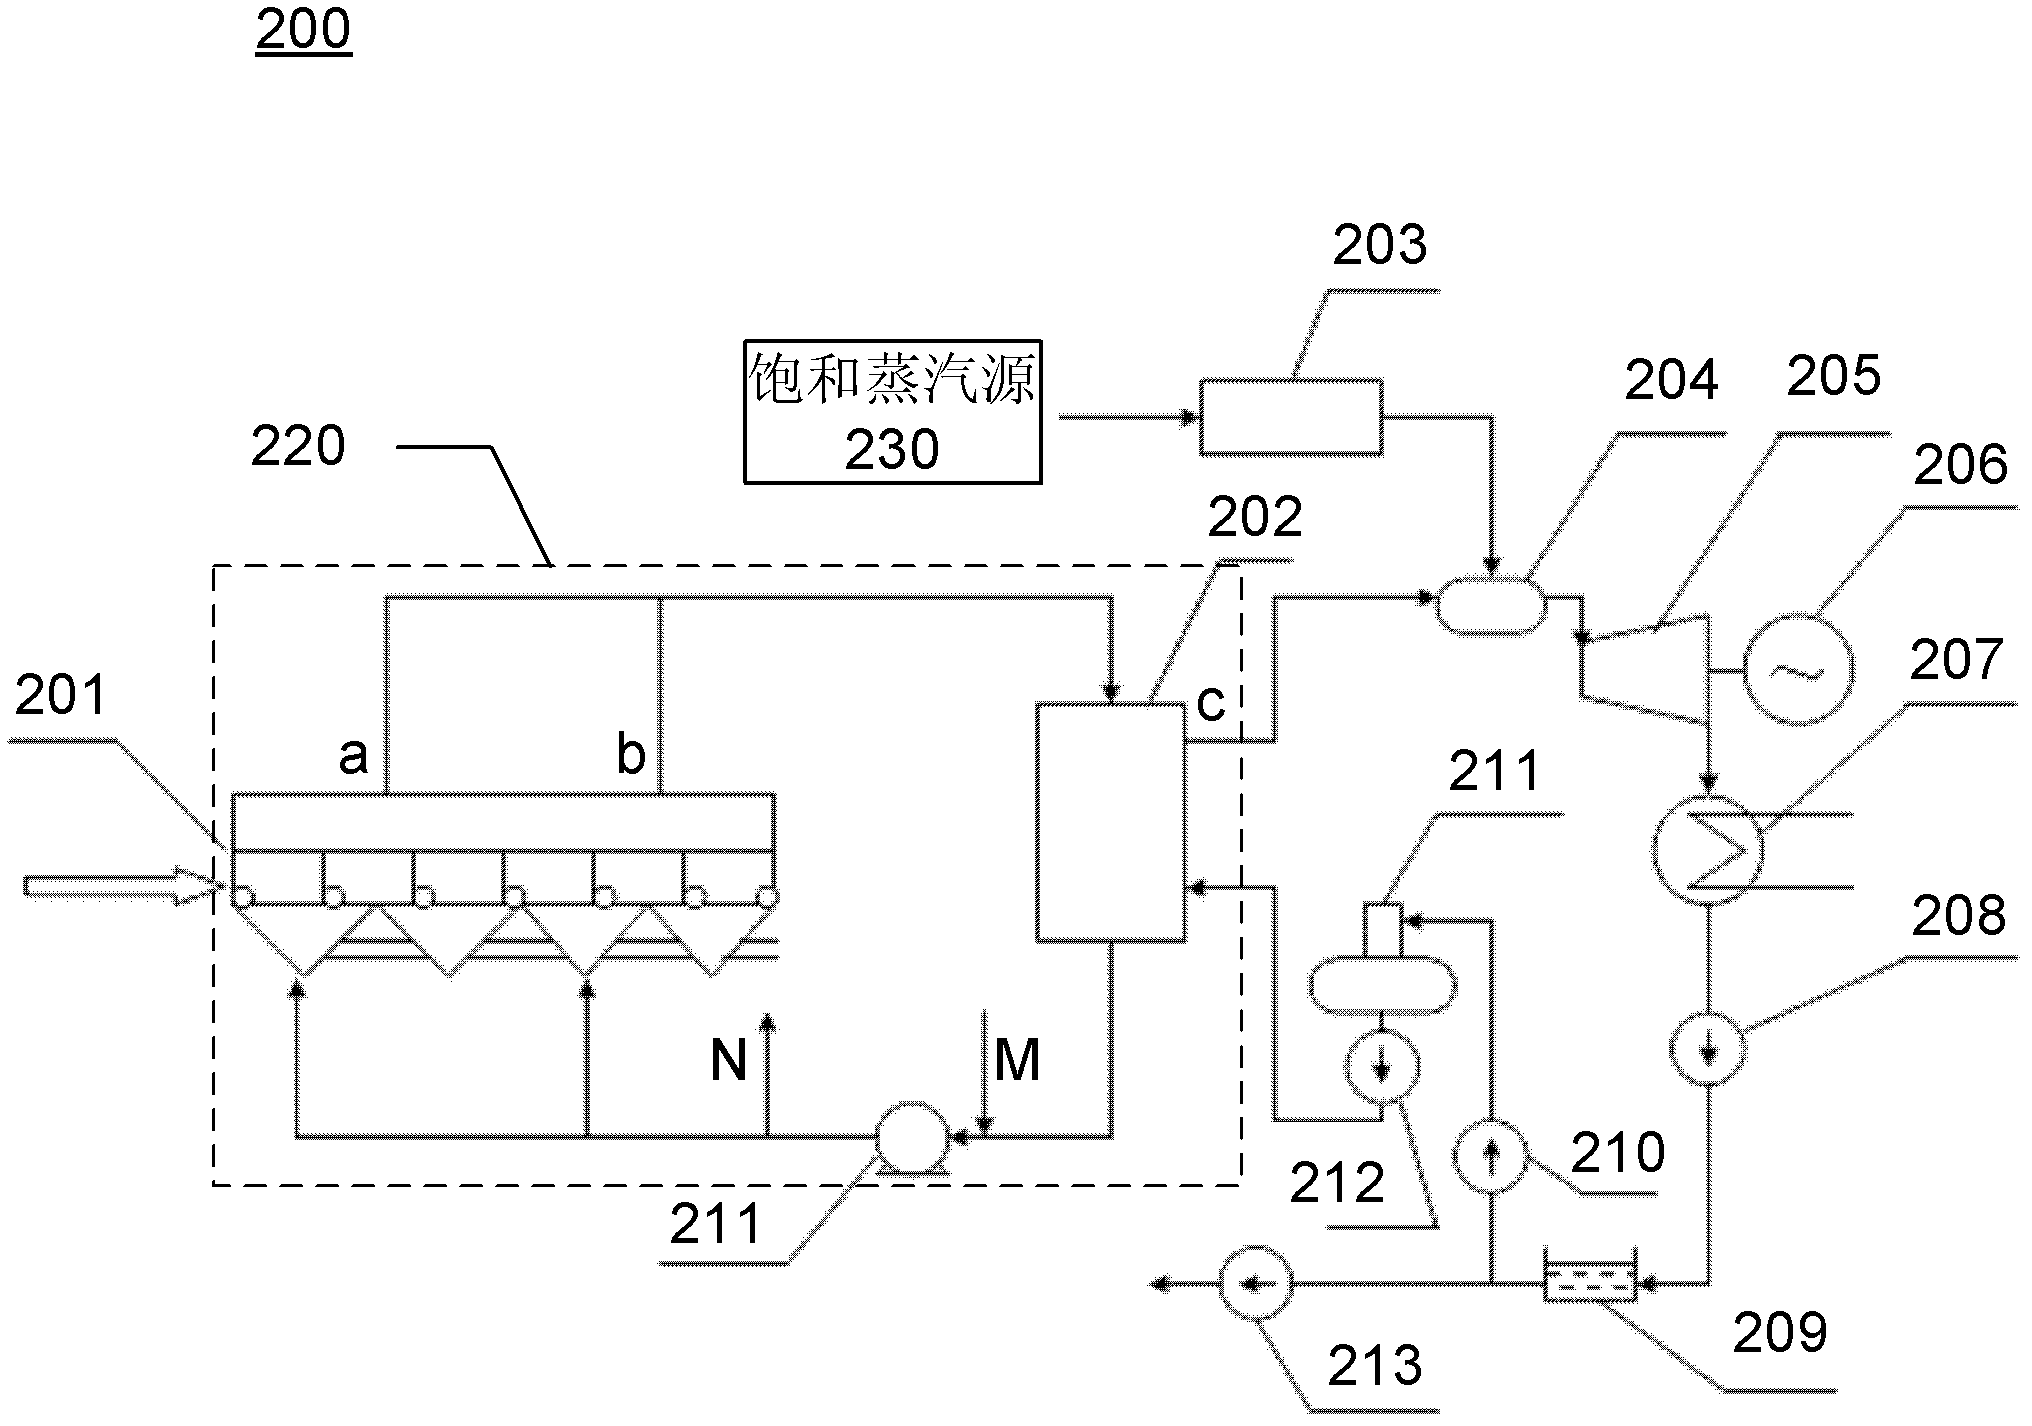 Comprehensive utilizing system for firing waste heat and saturated vapor